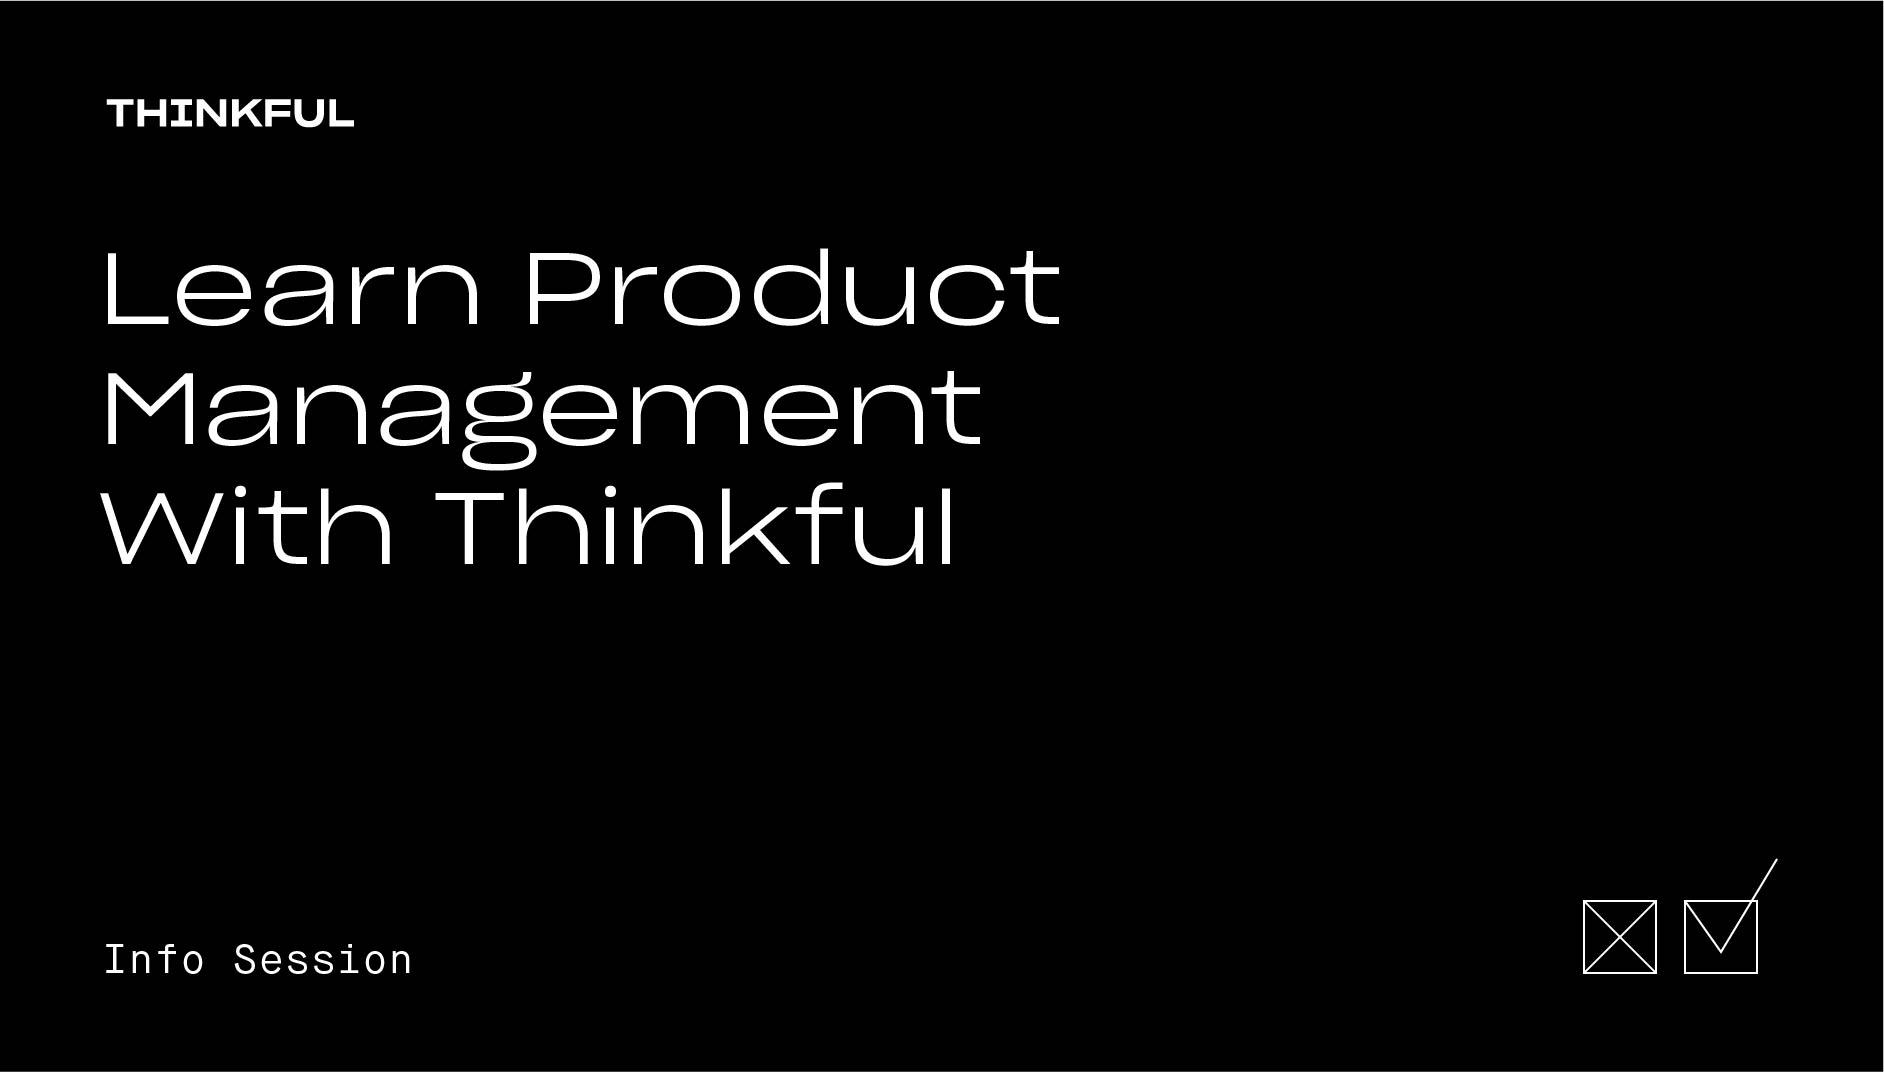 Thinkful Webinar | Learn Product Management with Thinkful